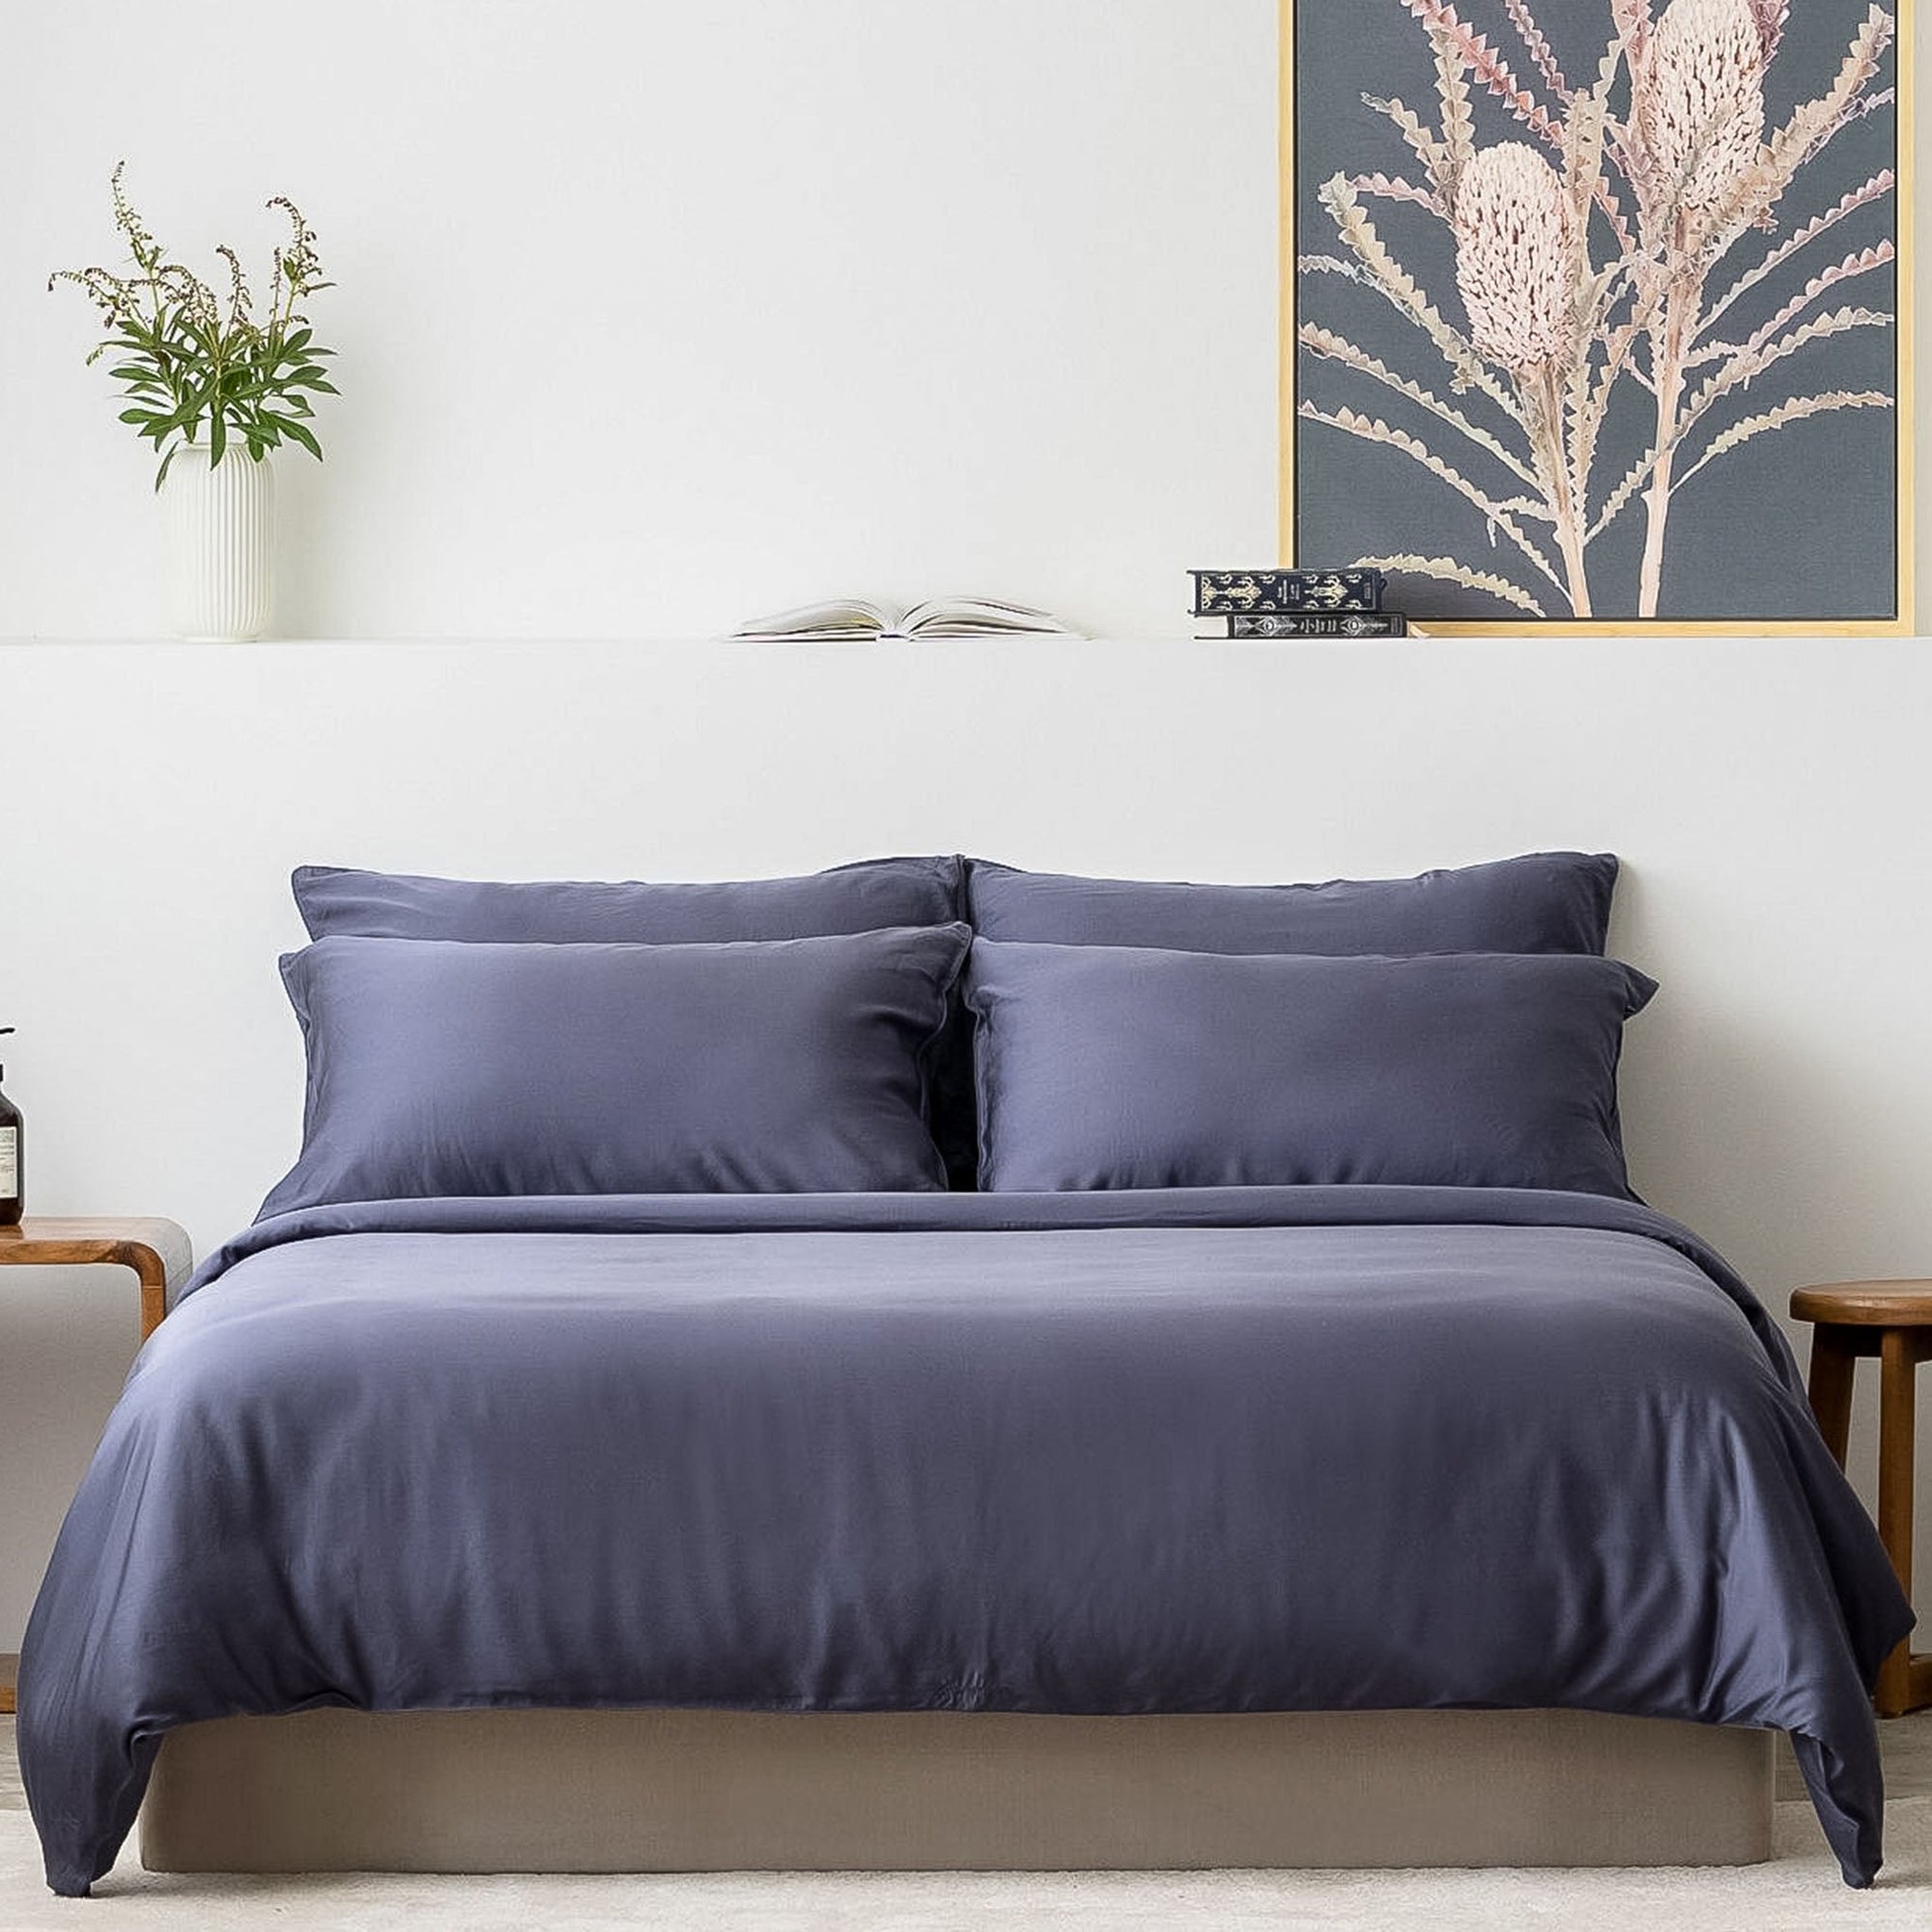 Midnight Blue TENCEL Bed Sheets Fitted Sheet Set with Tencel fitted sheet, Tencel Pillow Case, Tencel Duvet Cover. Buy Midnight Blue Tencel Fitted bed sheet set at Weavve Home, Best Bed Sheets Singapore and Luxury Hotel Sheets. 400 High Thread Count Bed Sheet. 